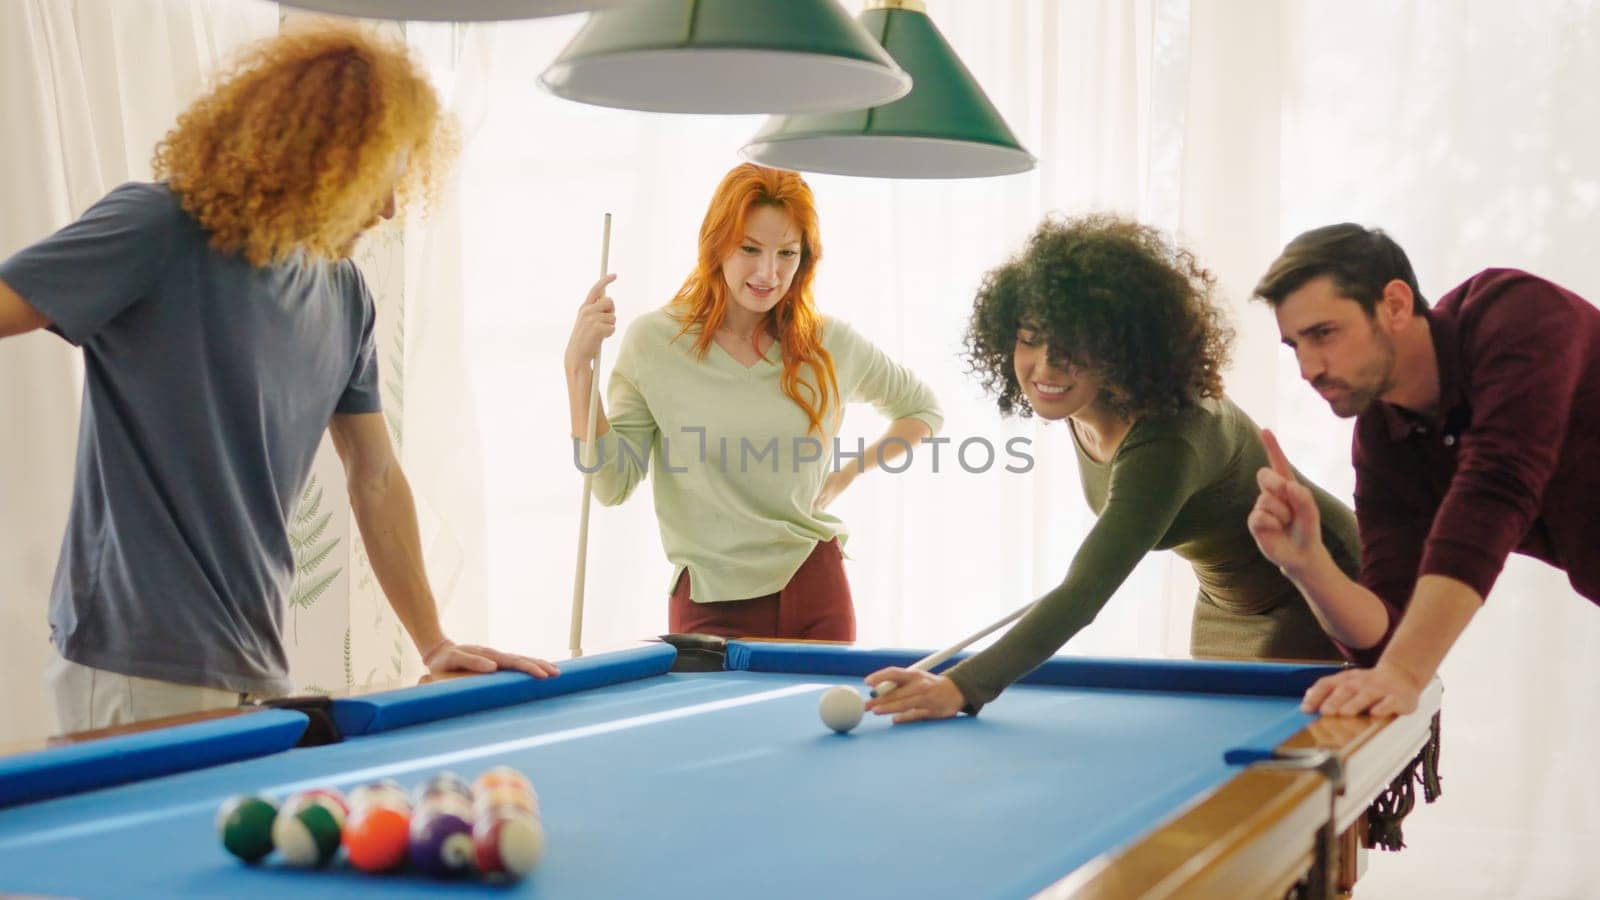 Beginner player hitting a billiard ball and laughing happy by ivanmoreno